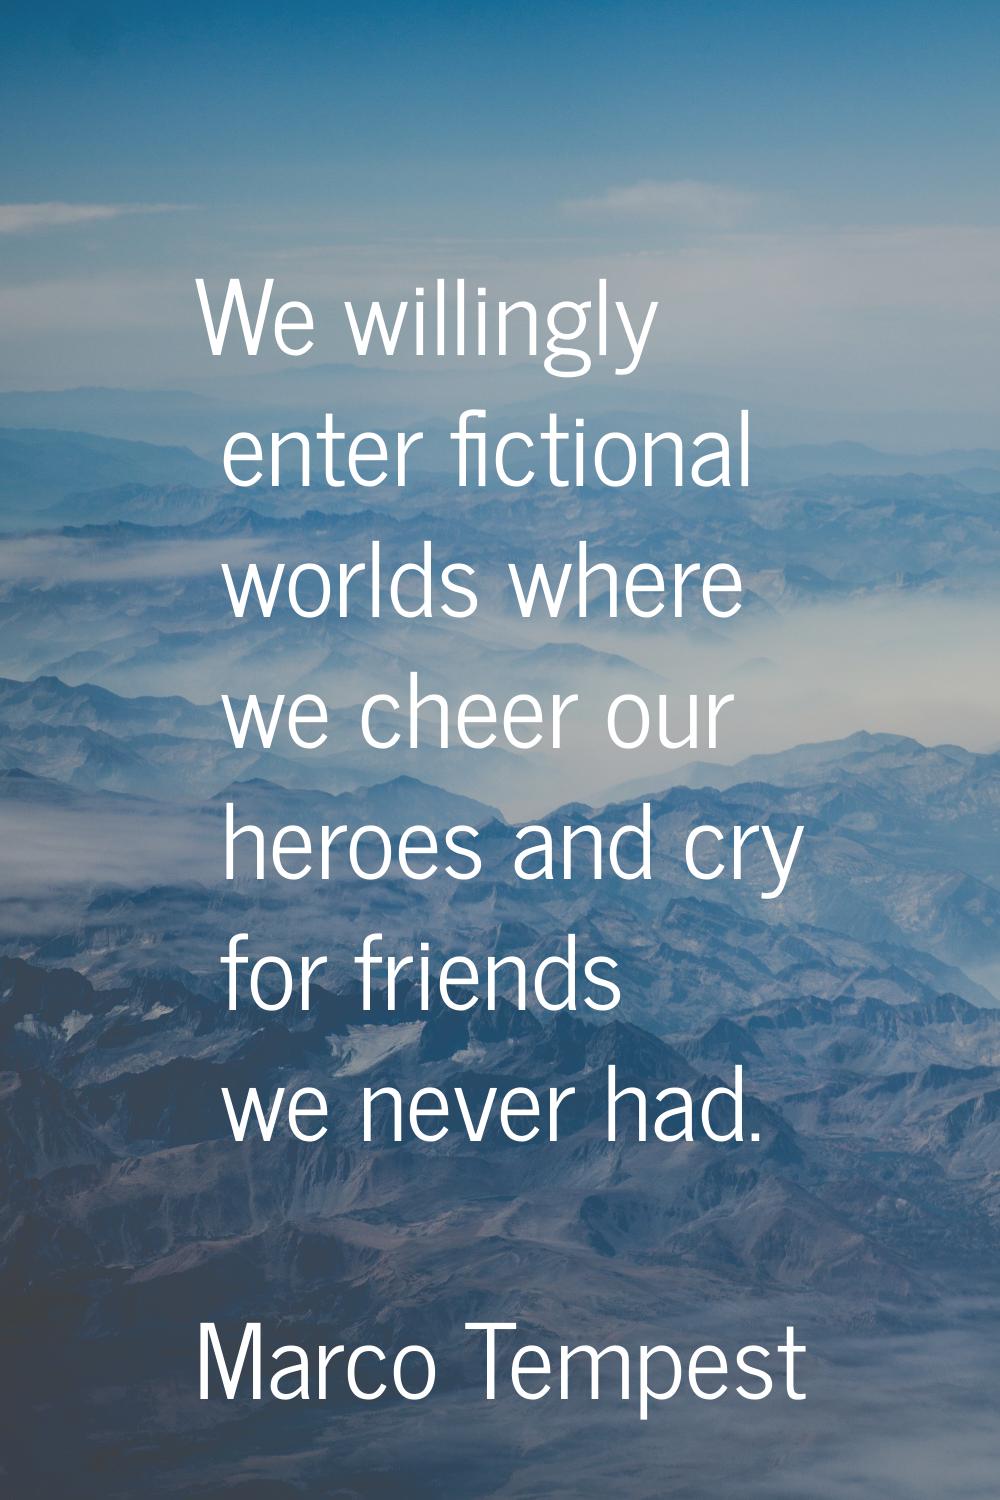 We willingly enter fictional worlds where we cheer our heroes and cry for friends we never had.